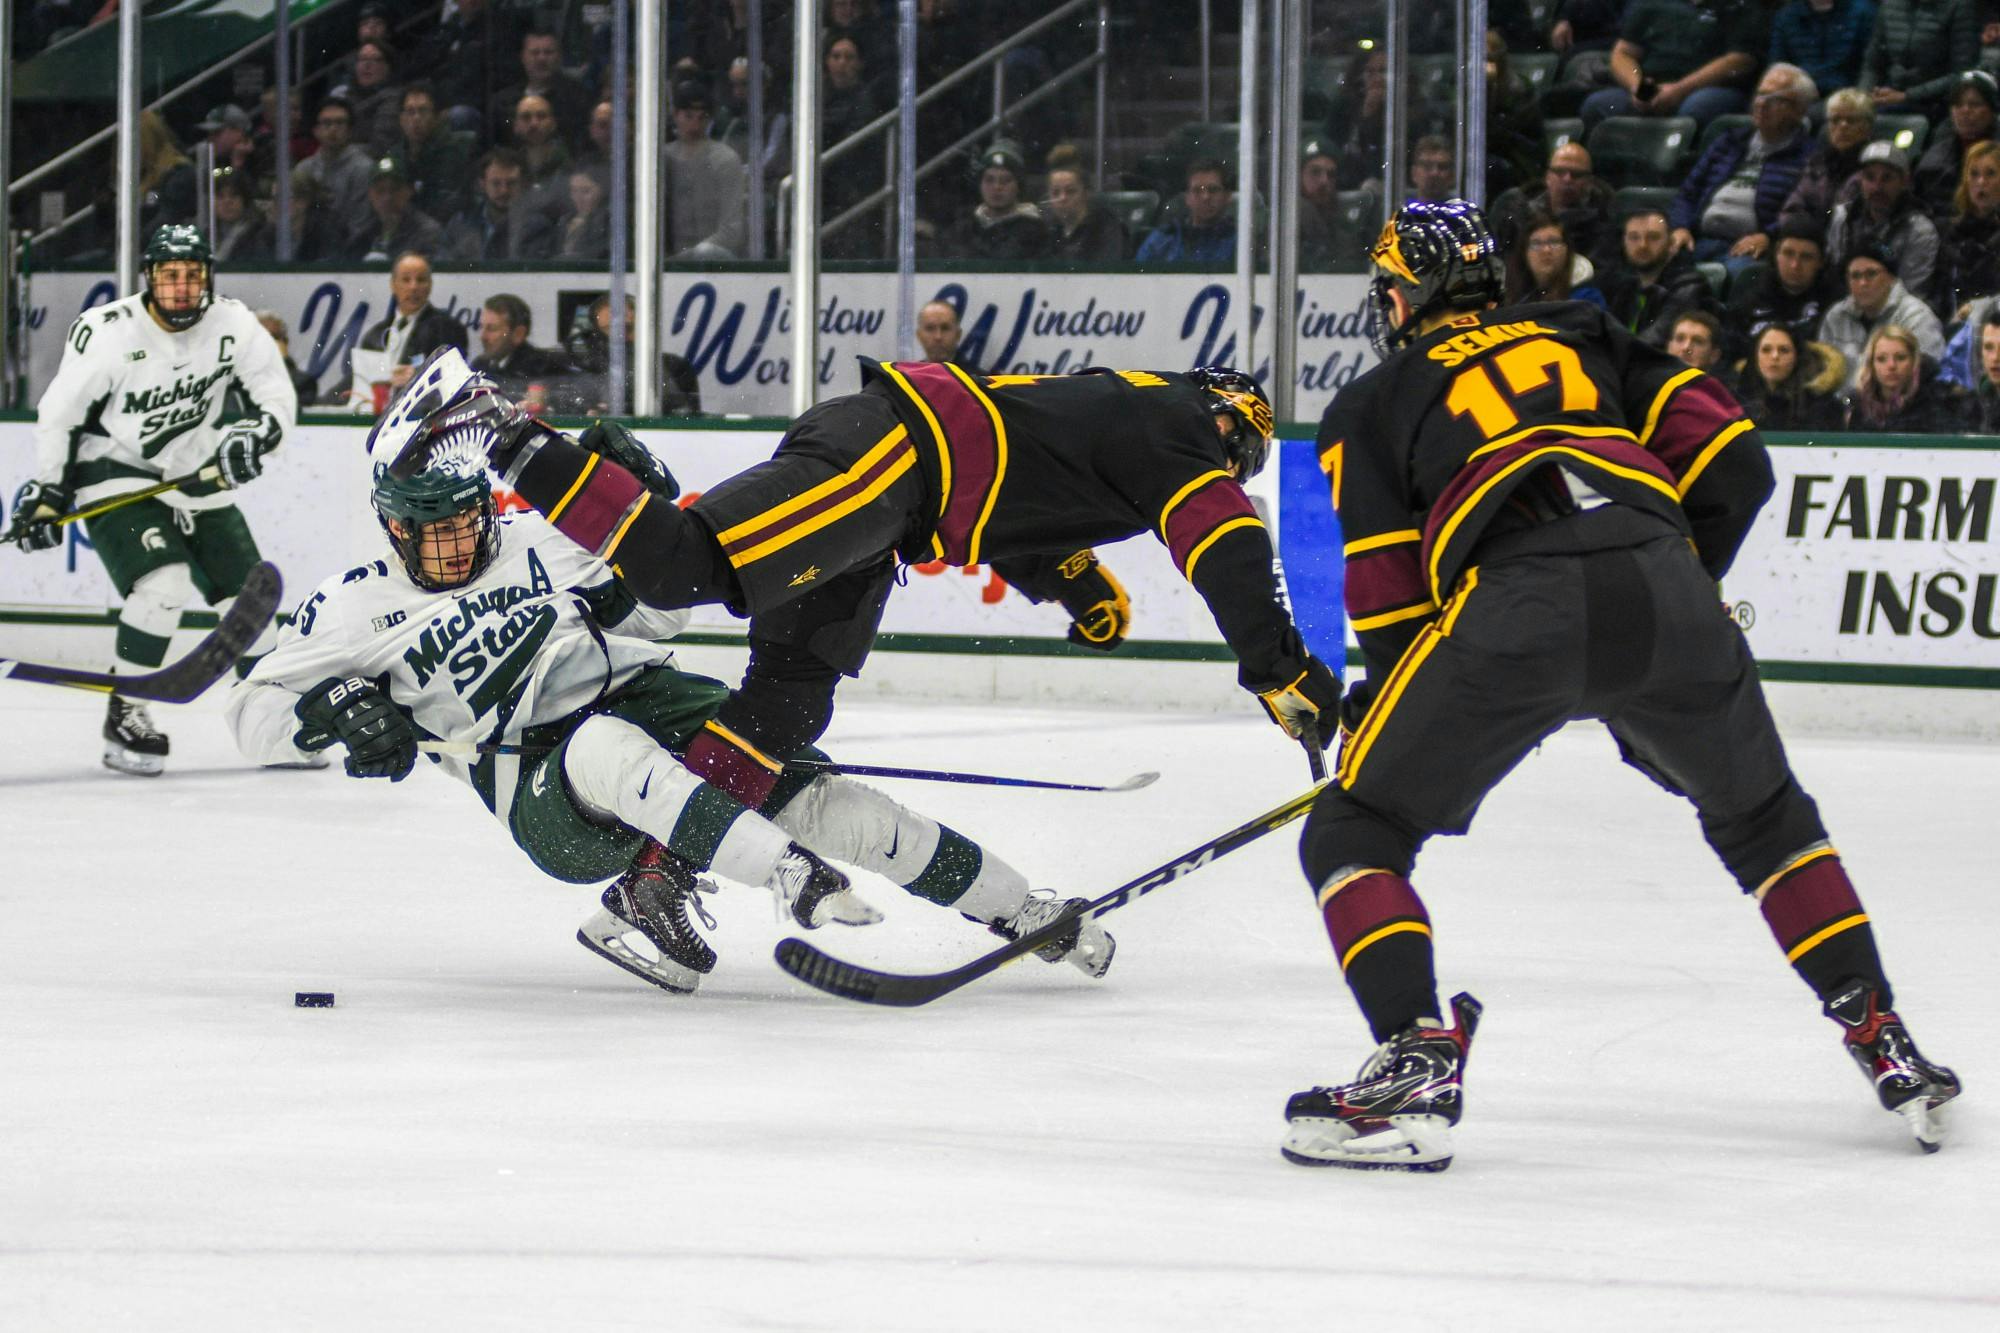 Senior center Patrick Khodorenko (55) collides with an Arizona player during the game against Arizona at the Munn Ice Arena on Dec. 14, 2019. The Sun Devils defeated the Spartans, 4-3.